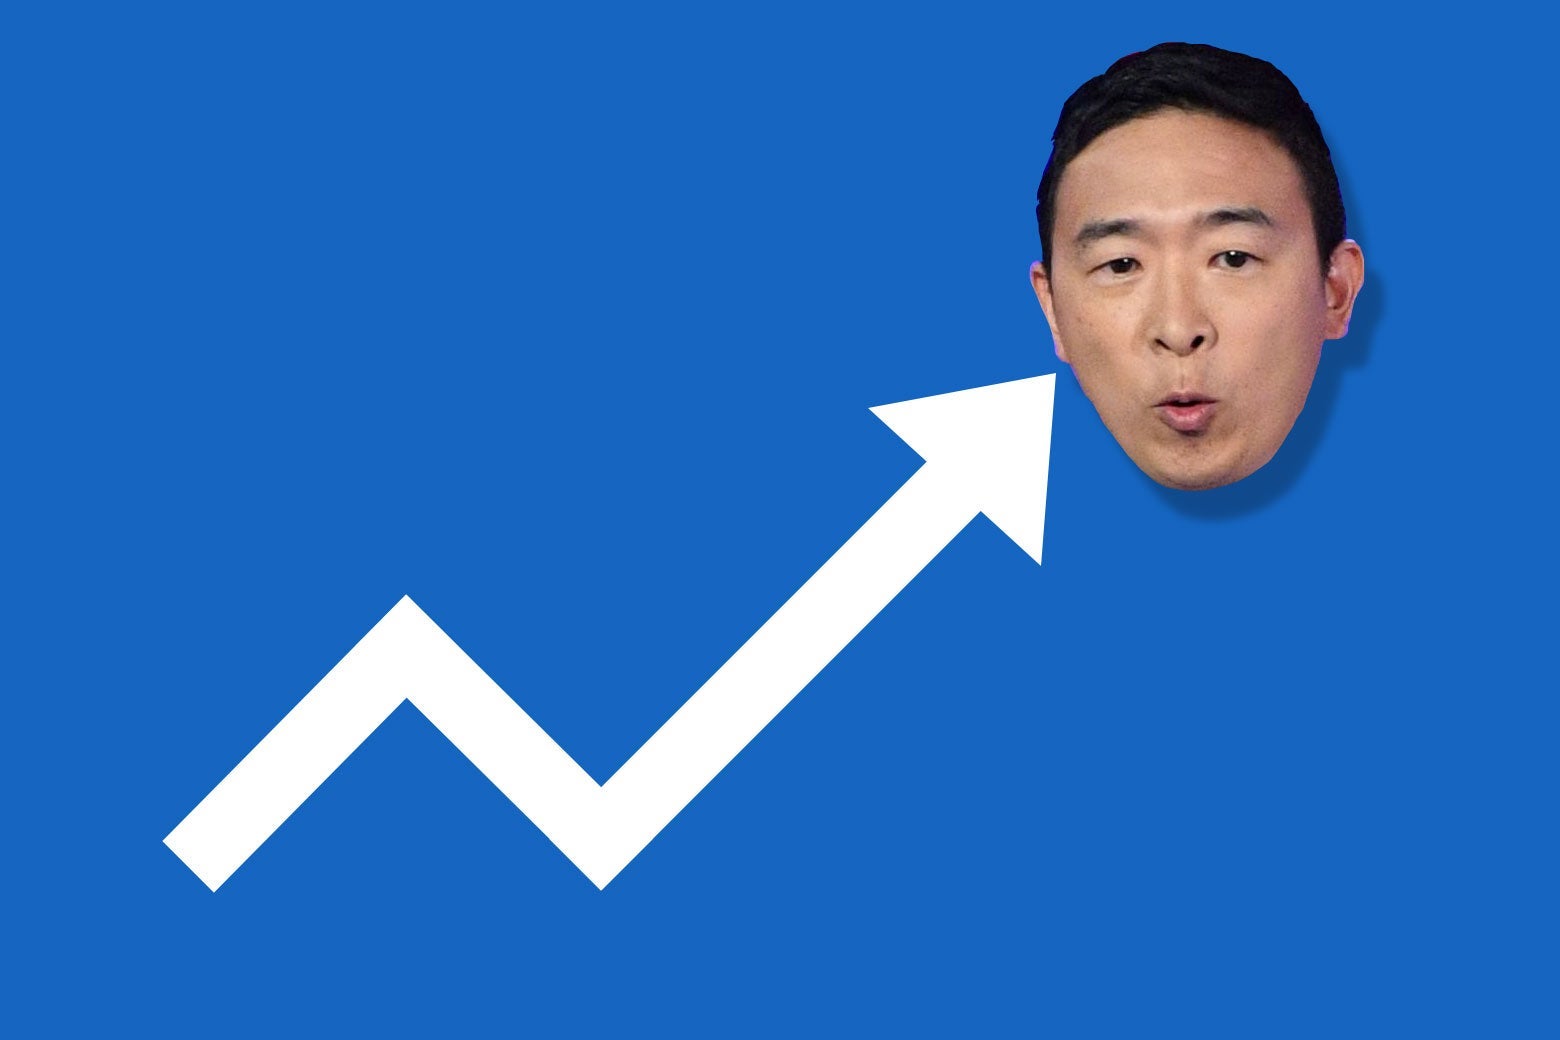 Photo illustration of an upward trending chart leading to Andrew Yang's face.